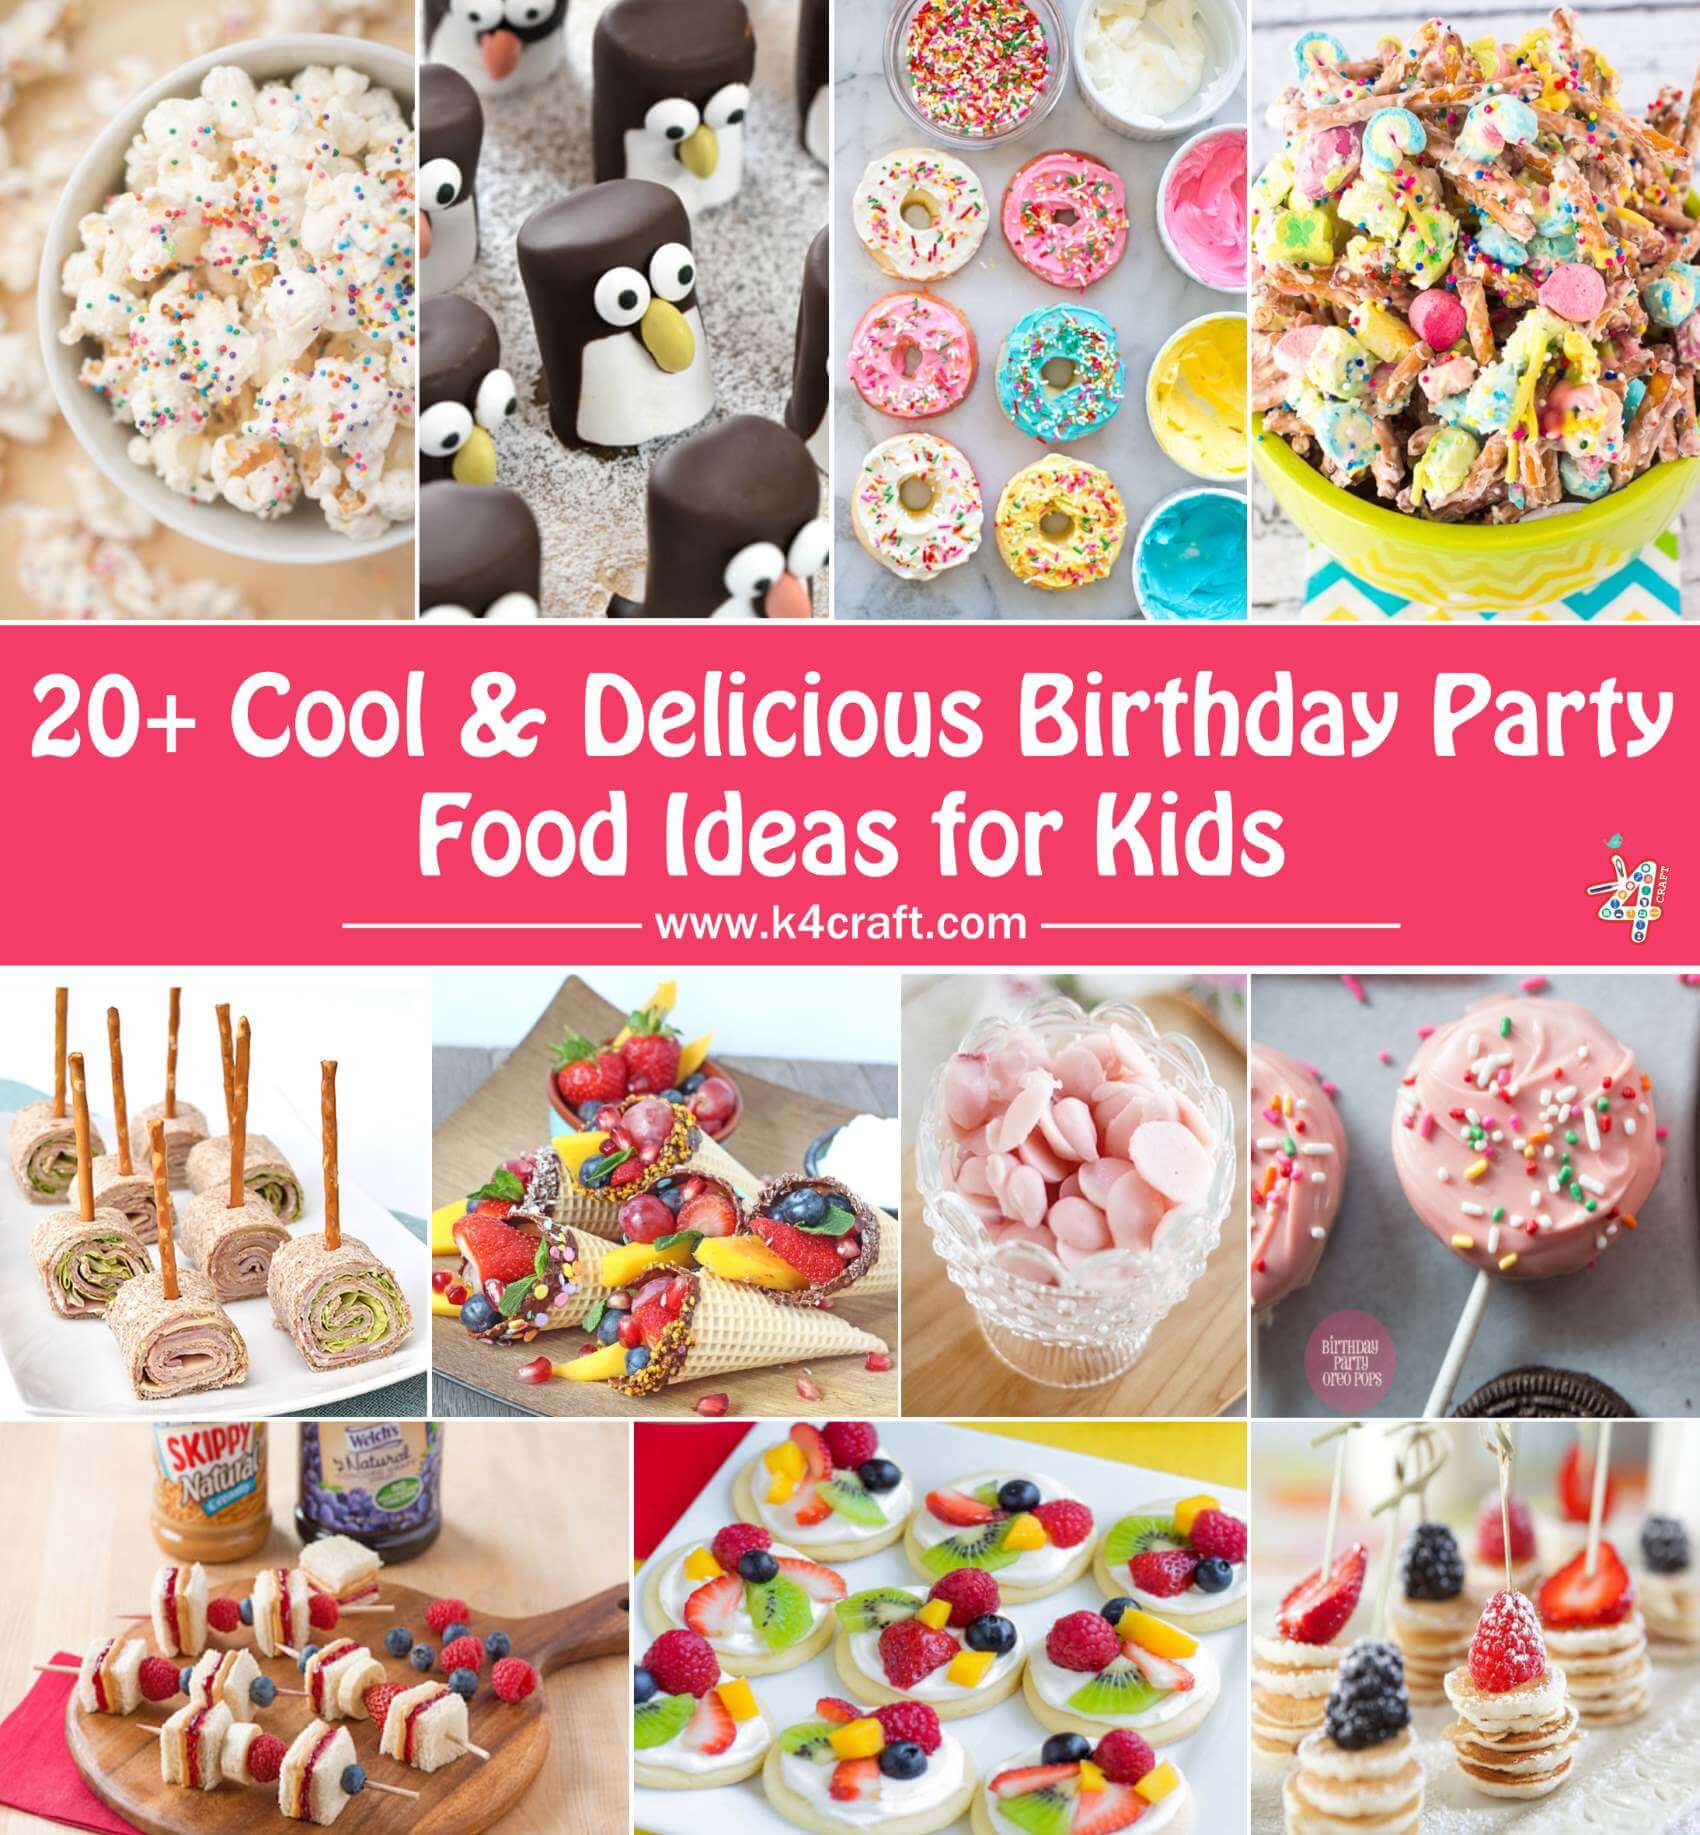 cool-delicious-birthday-party-food-ideas-for-kids-k4-craft